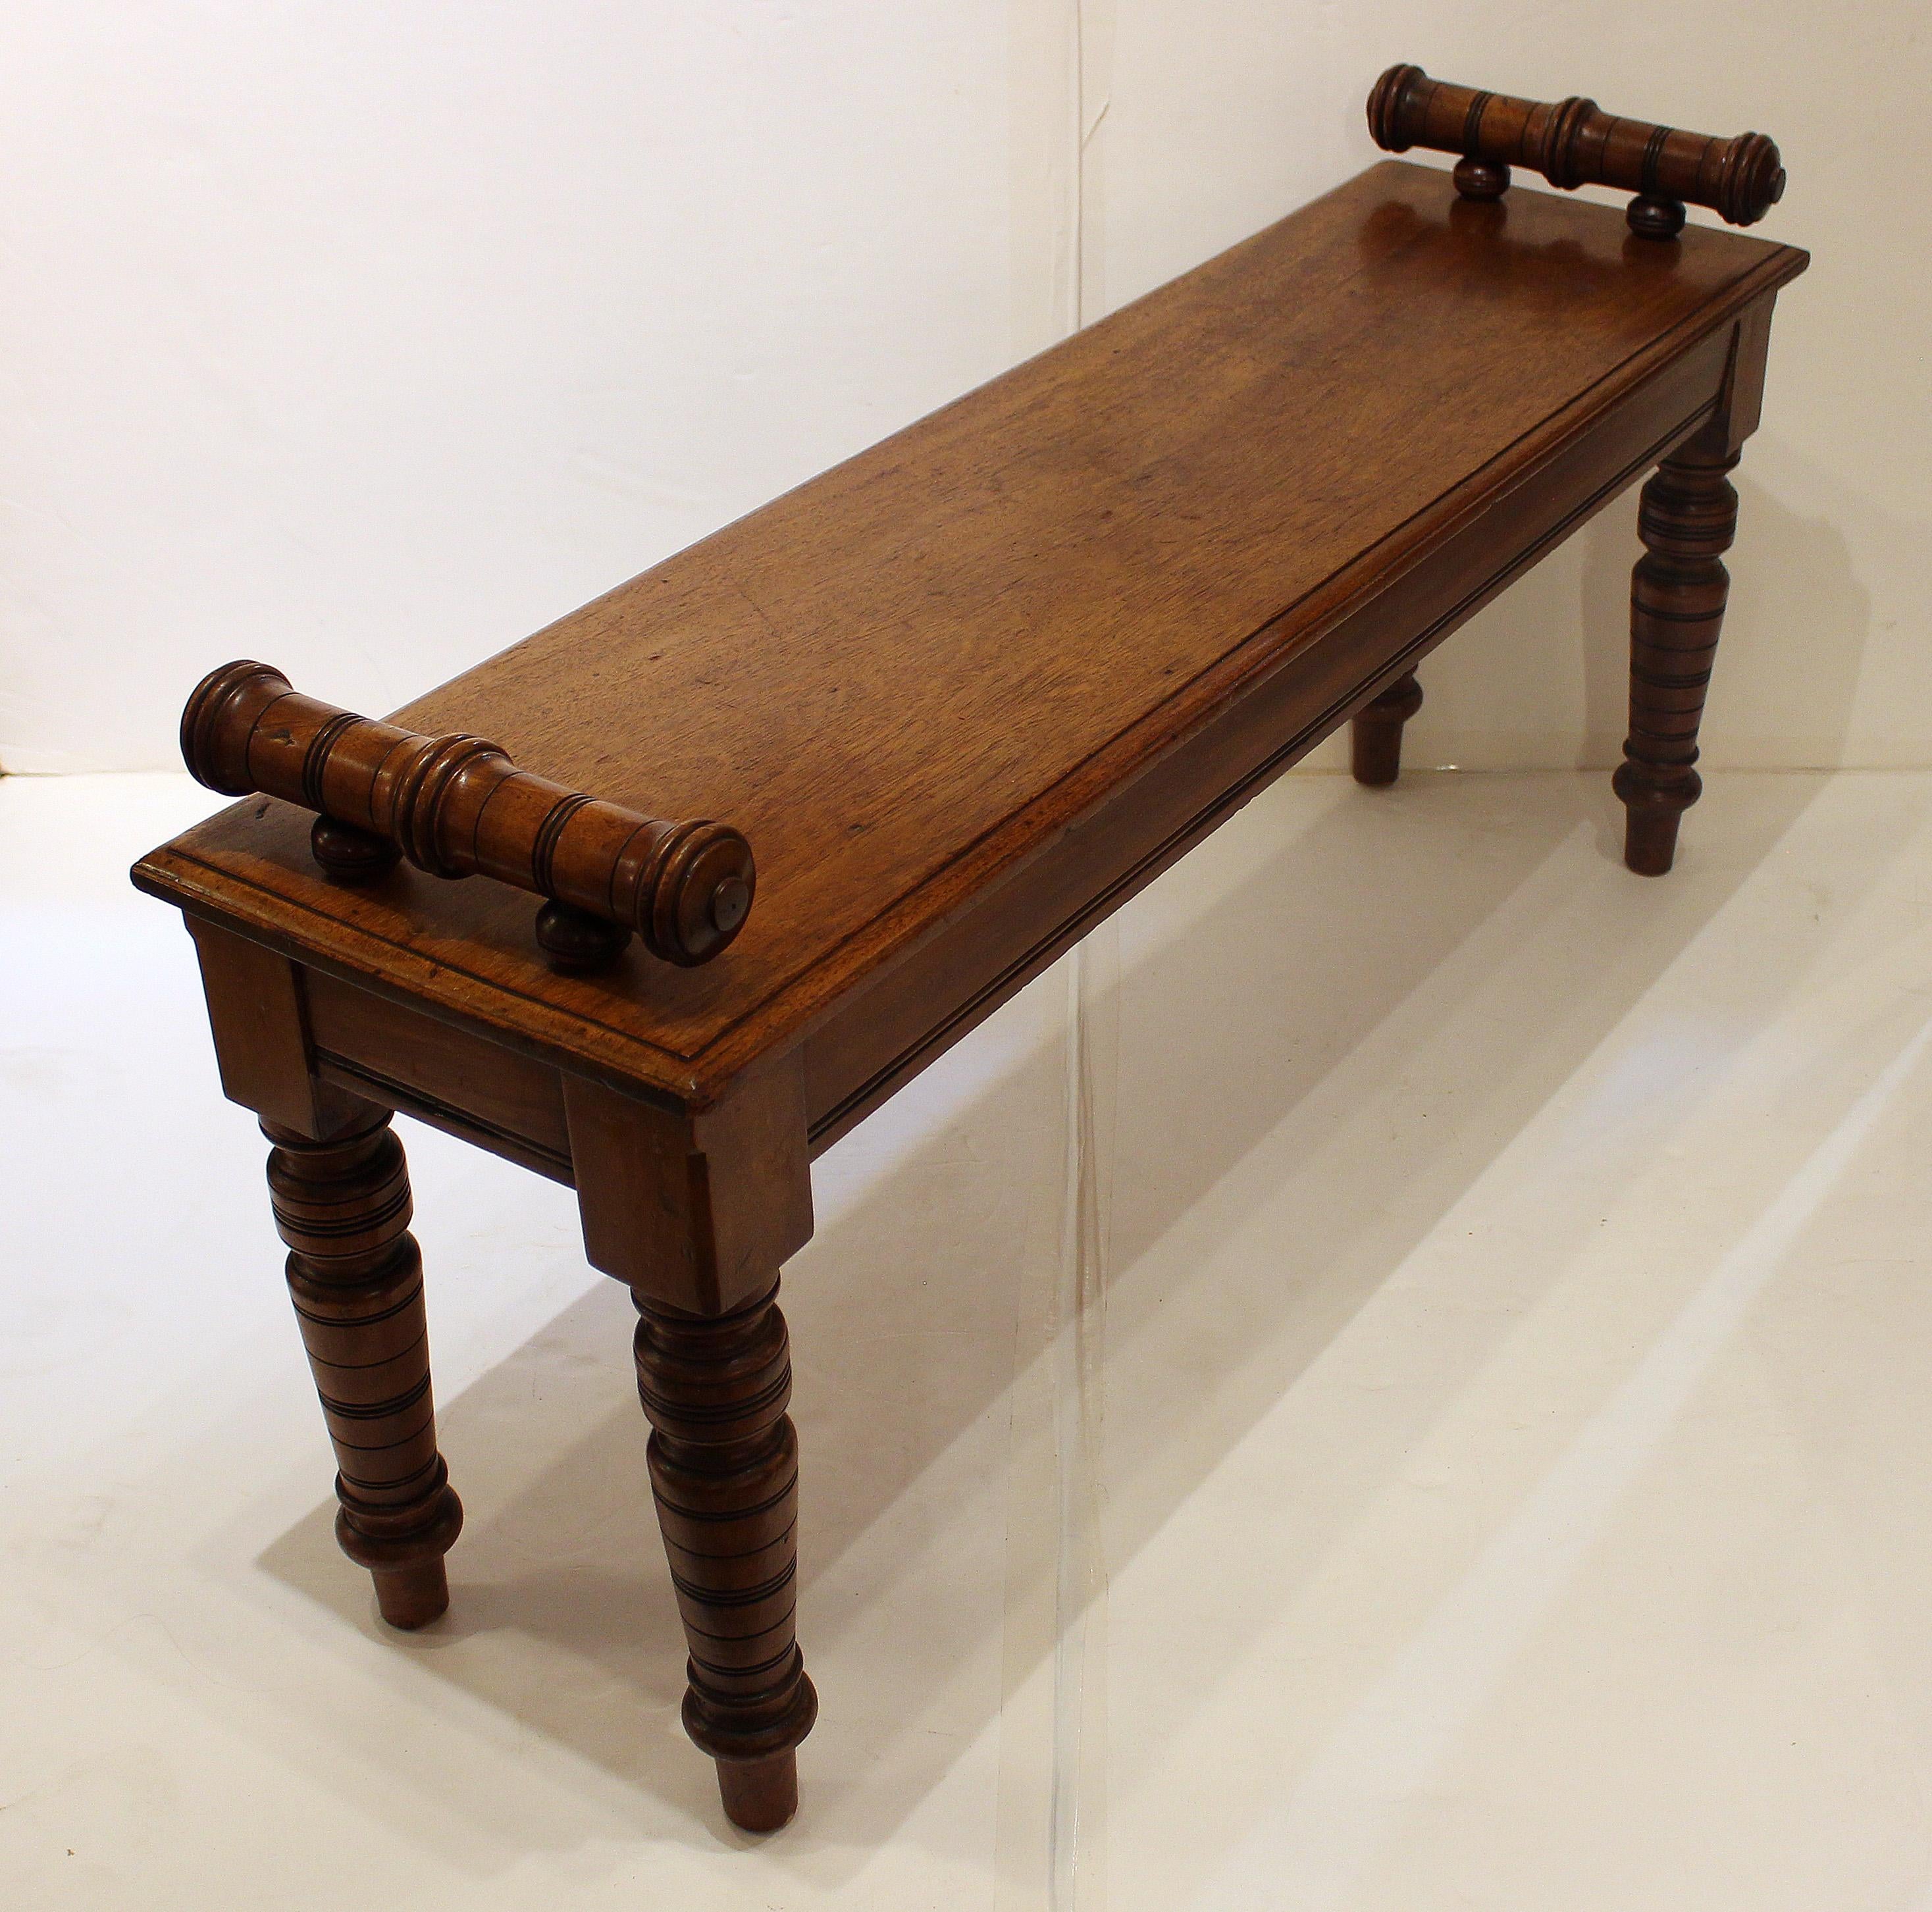 Hall or window bench, English. Boldly turned, tapered legs, circa 1865. Raised, ring turned bolsters. Fine color. Aprons of thick mahogany over deal. Seat & turnings of solid mahogany. Provenance: Estate of Katharine Reid, former director Cleveland